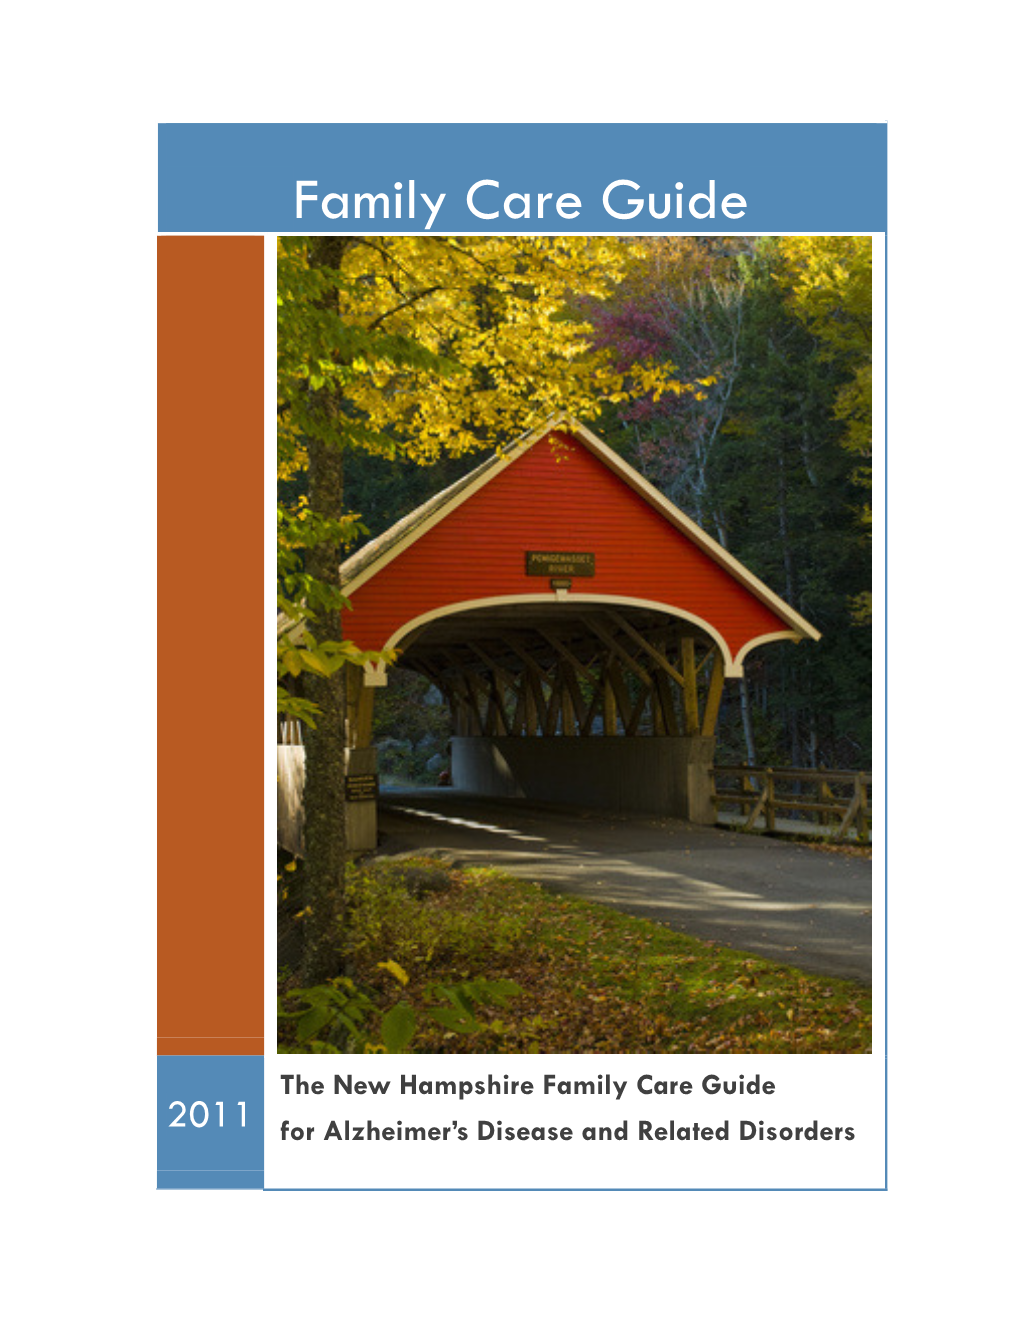 Nh Family Care Guide for Alzheimer’S Disease an D Related Disorders